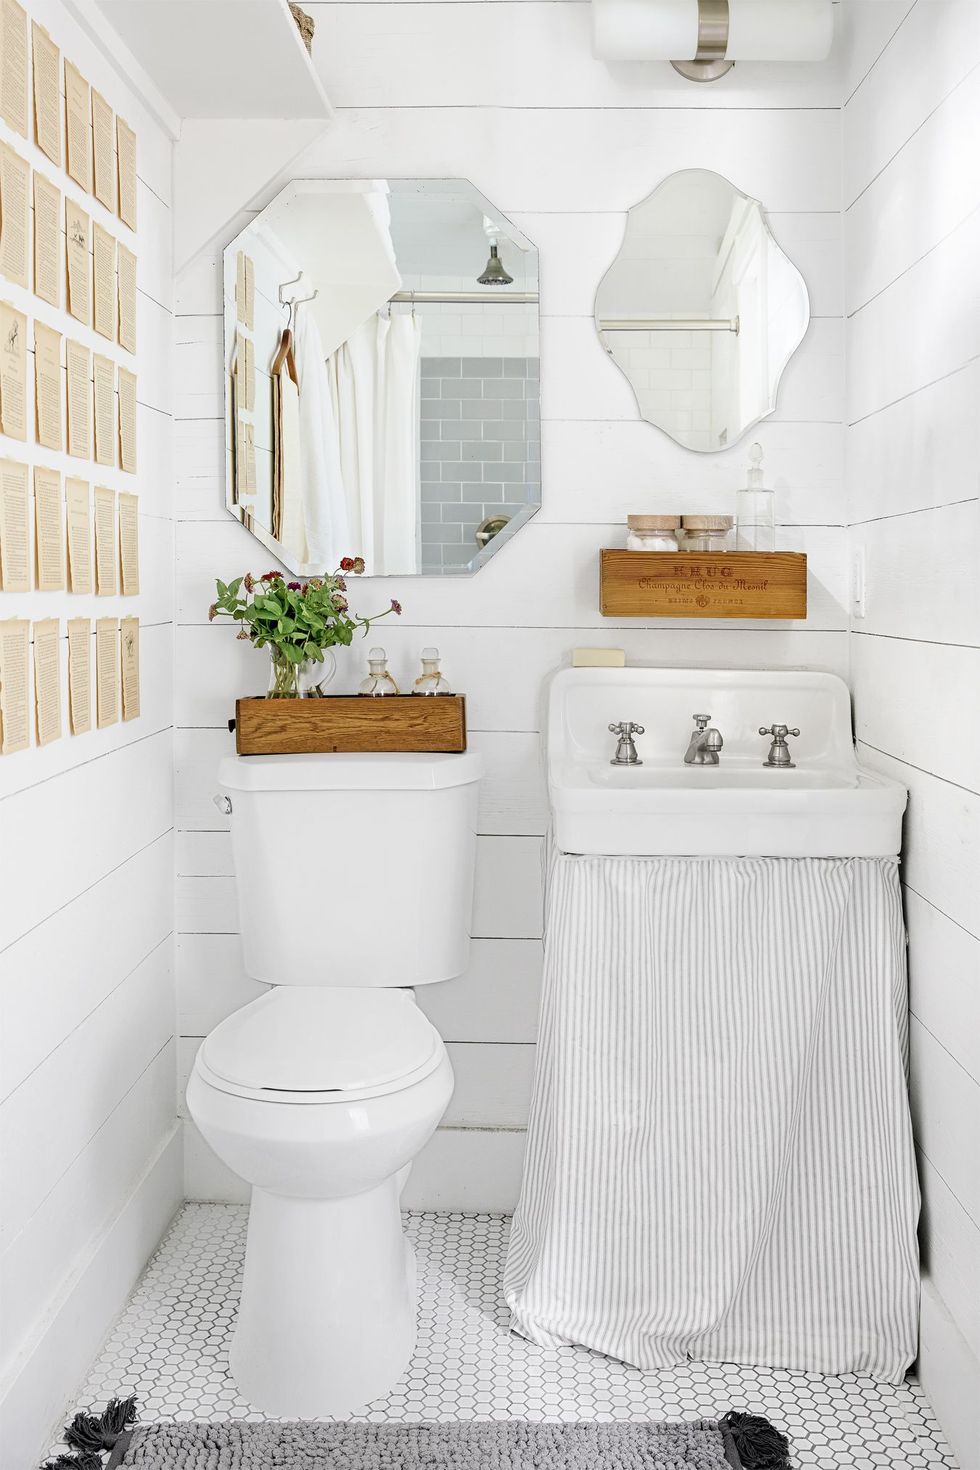 Small bathroom shower tile ideas: 10 looks that stretch space